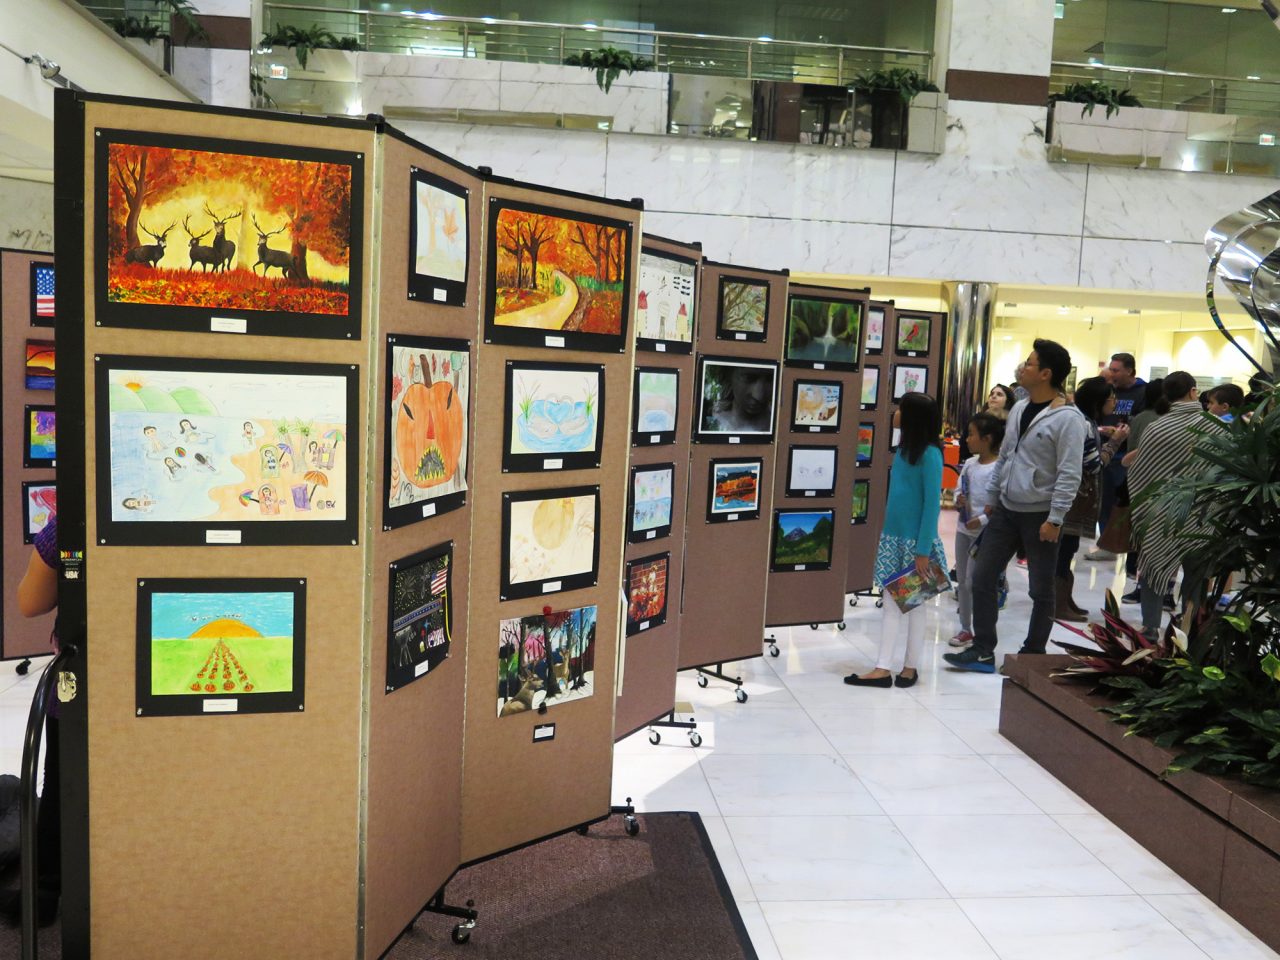 Movable art show display system allows a bank to showcase student artwork